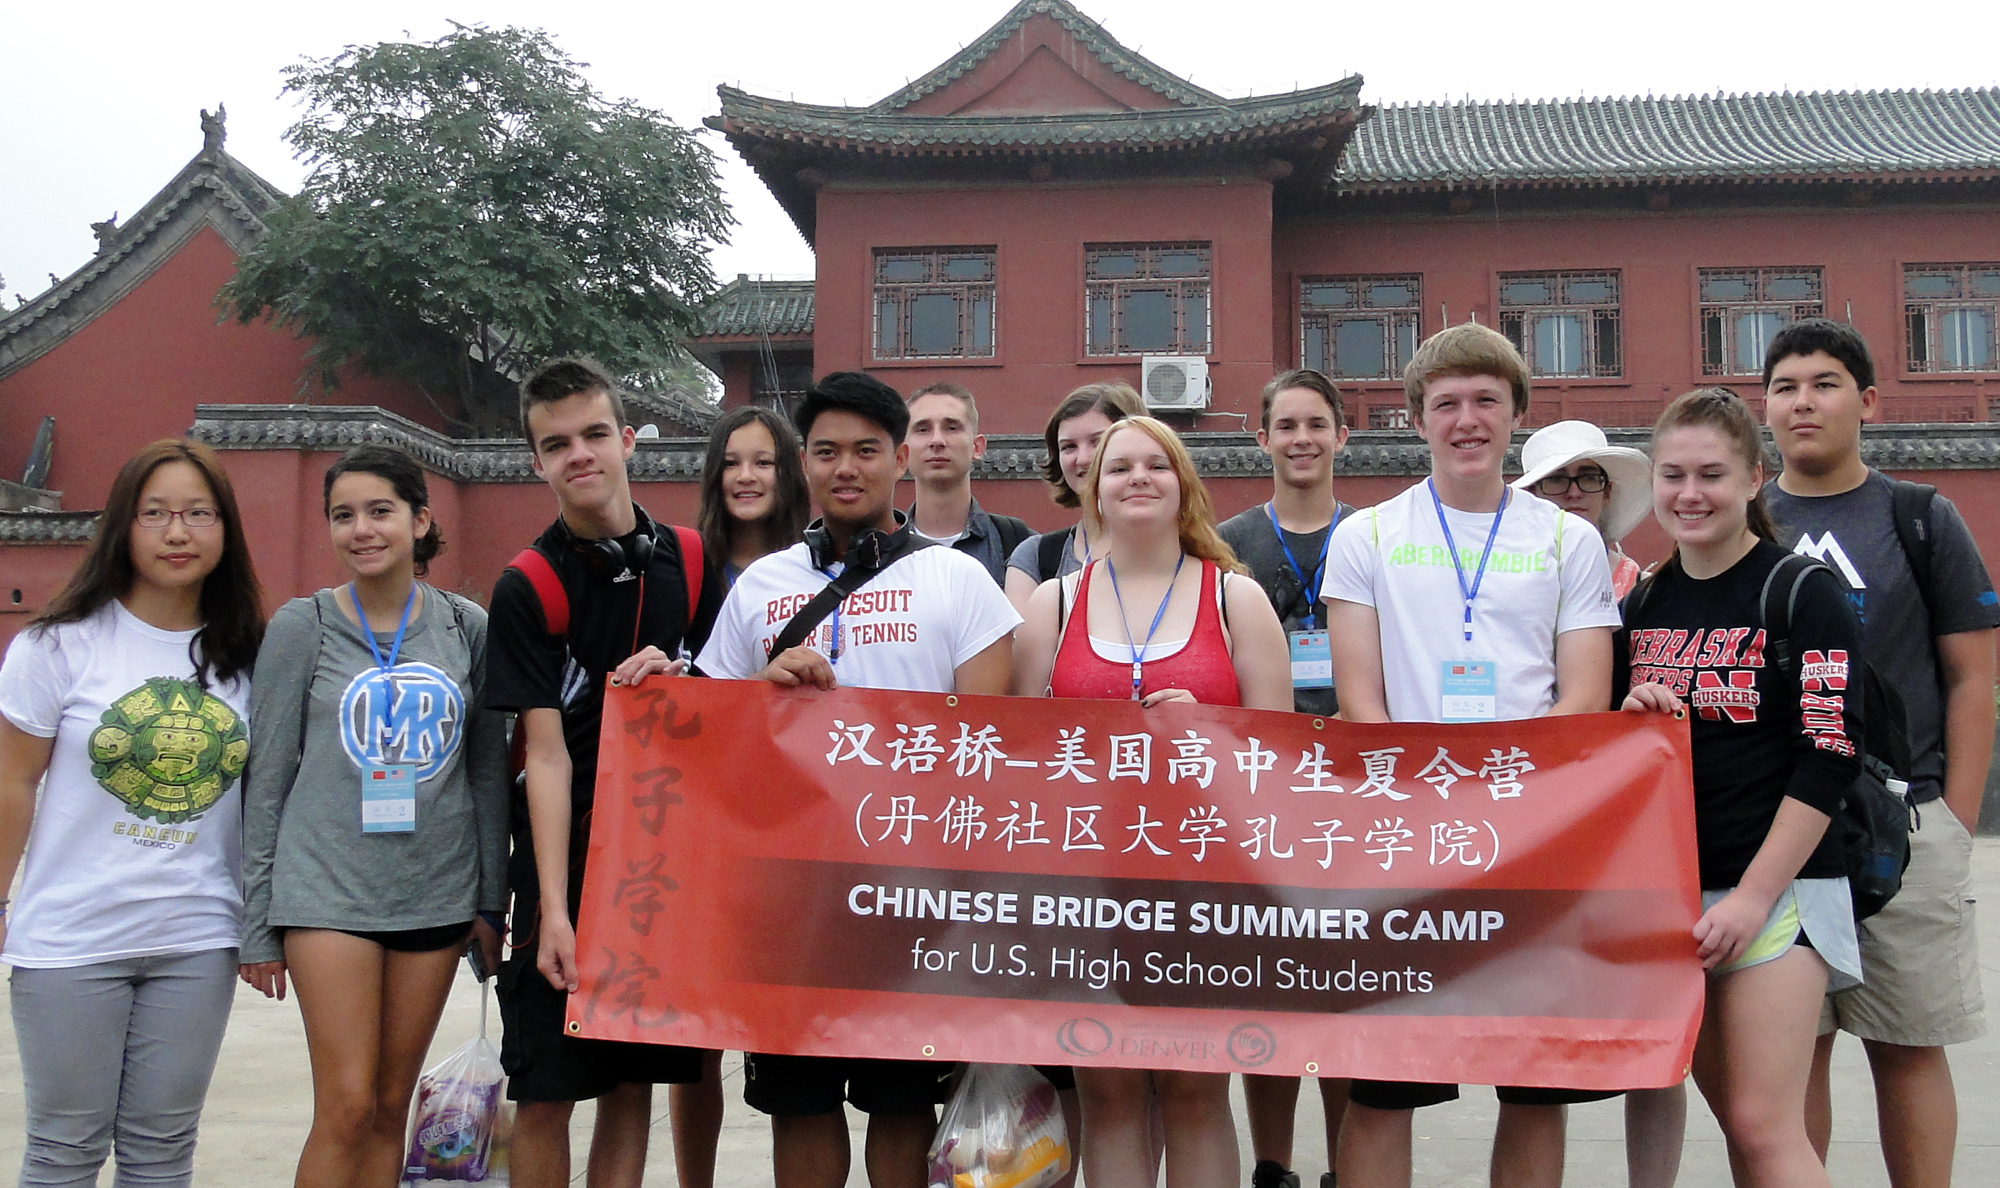 group of students in China holding a red banner